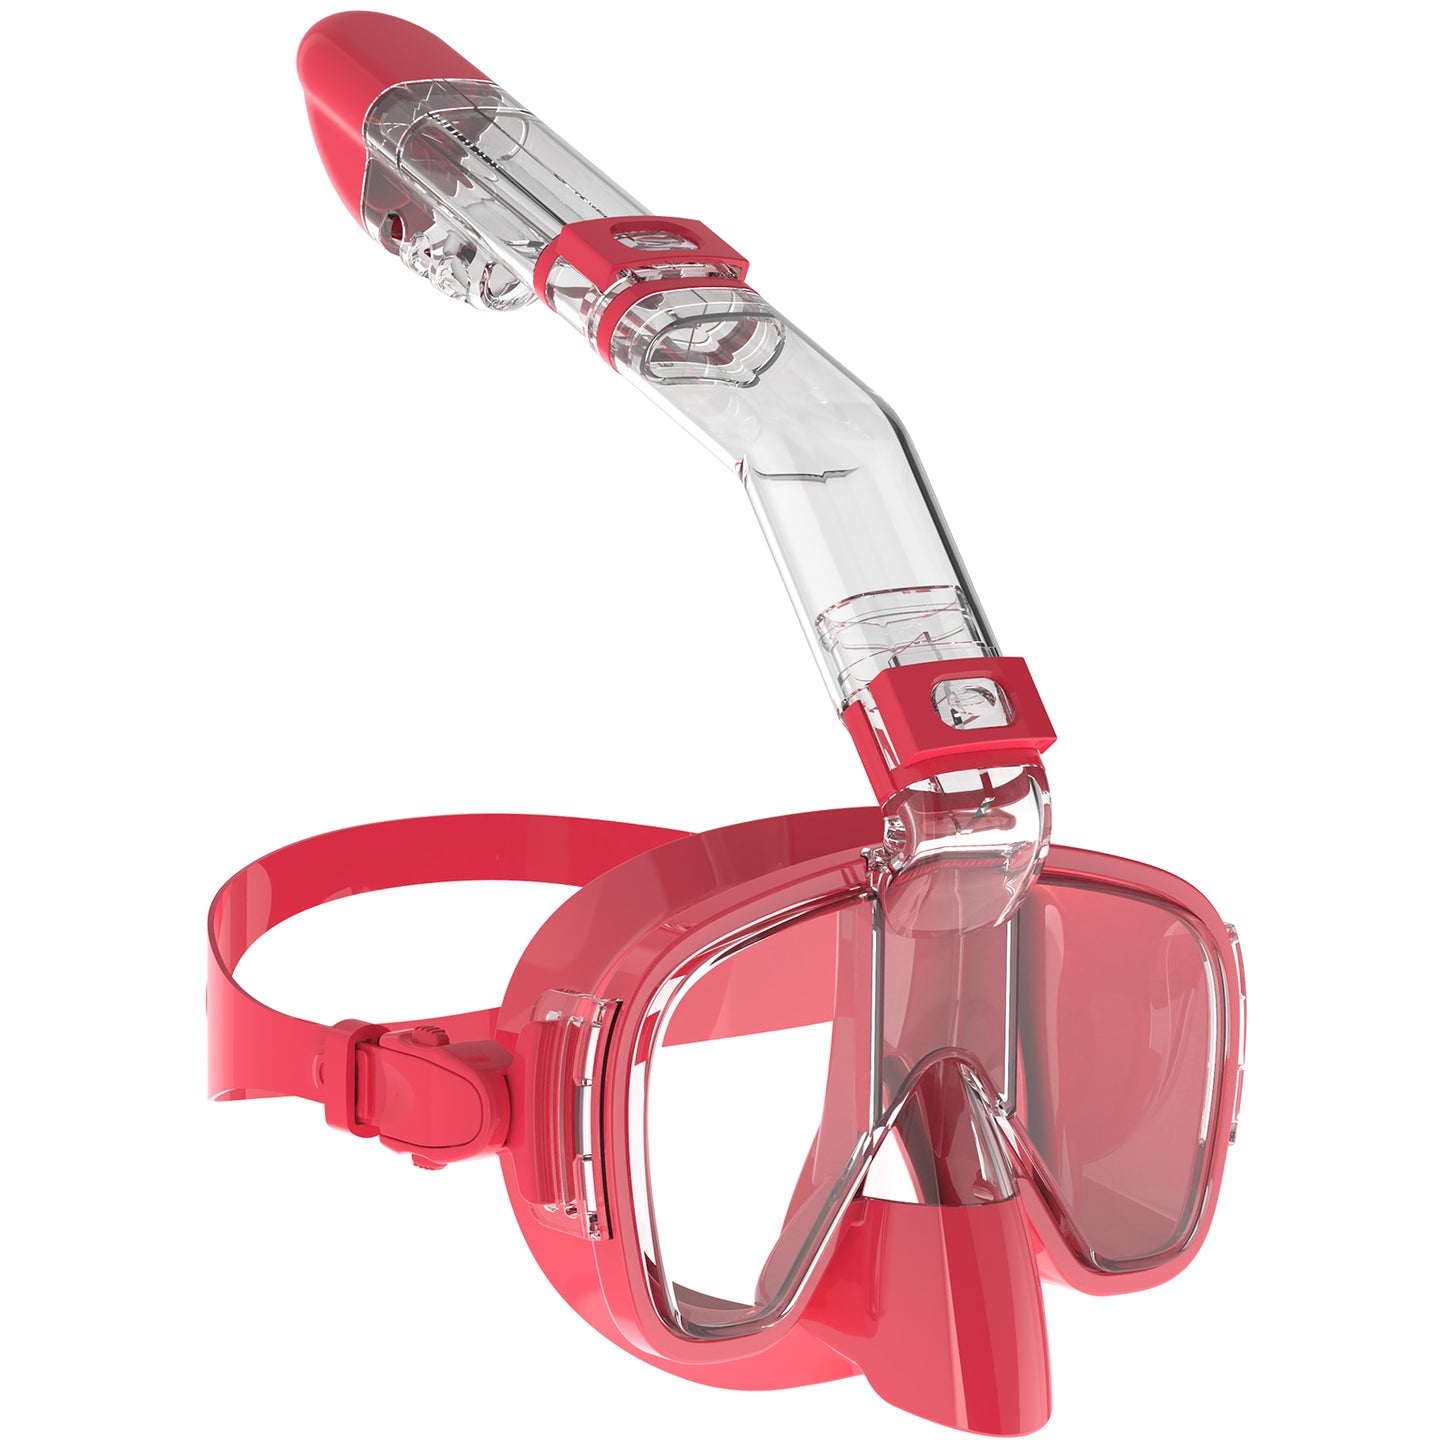 New arrival diving mask snorkel 2 in 1